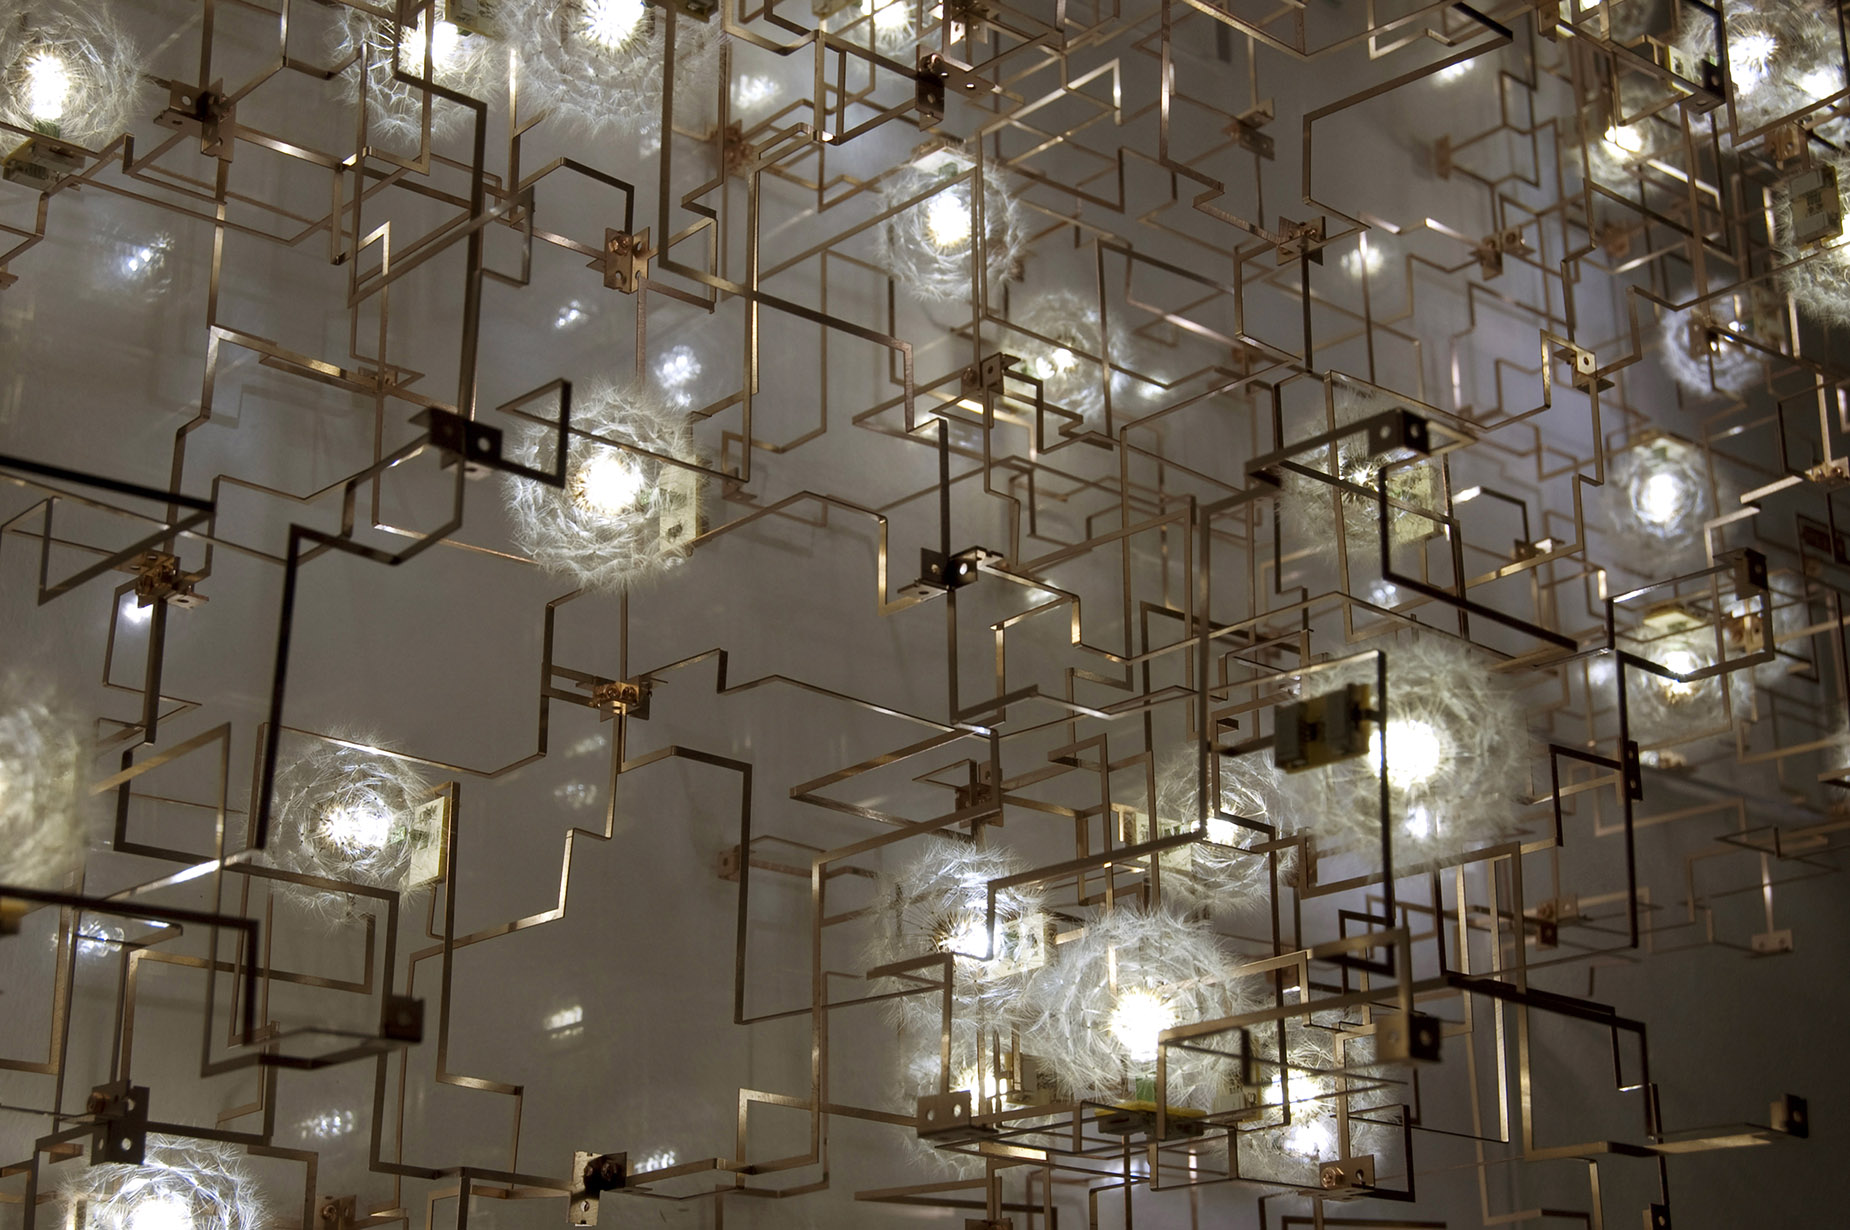 Detail view of Fragile Feature, showcasing the size and number of the individual seeds of the dandelion attached to LED lights.